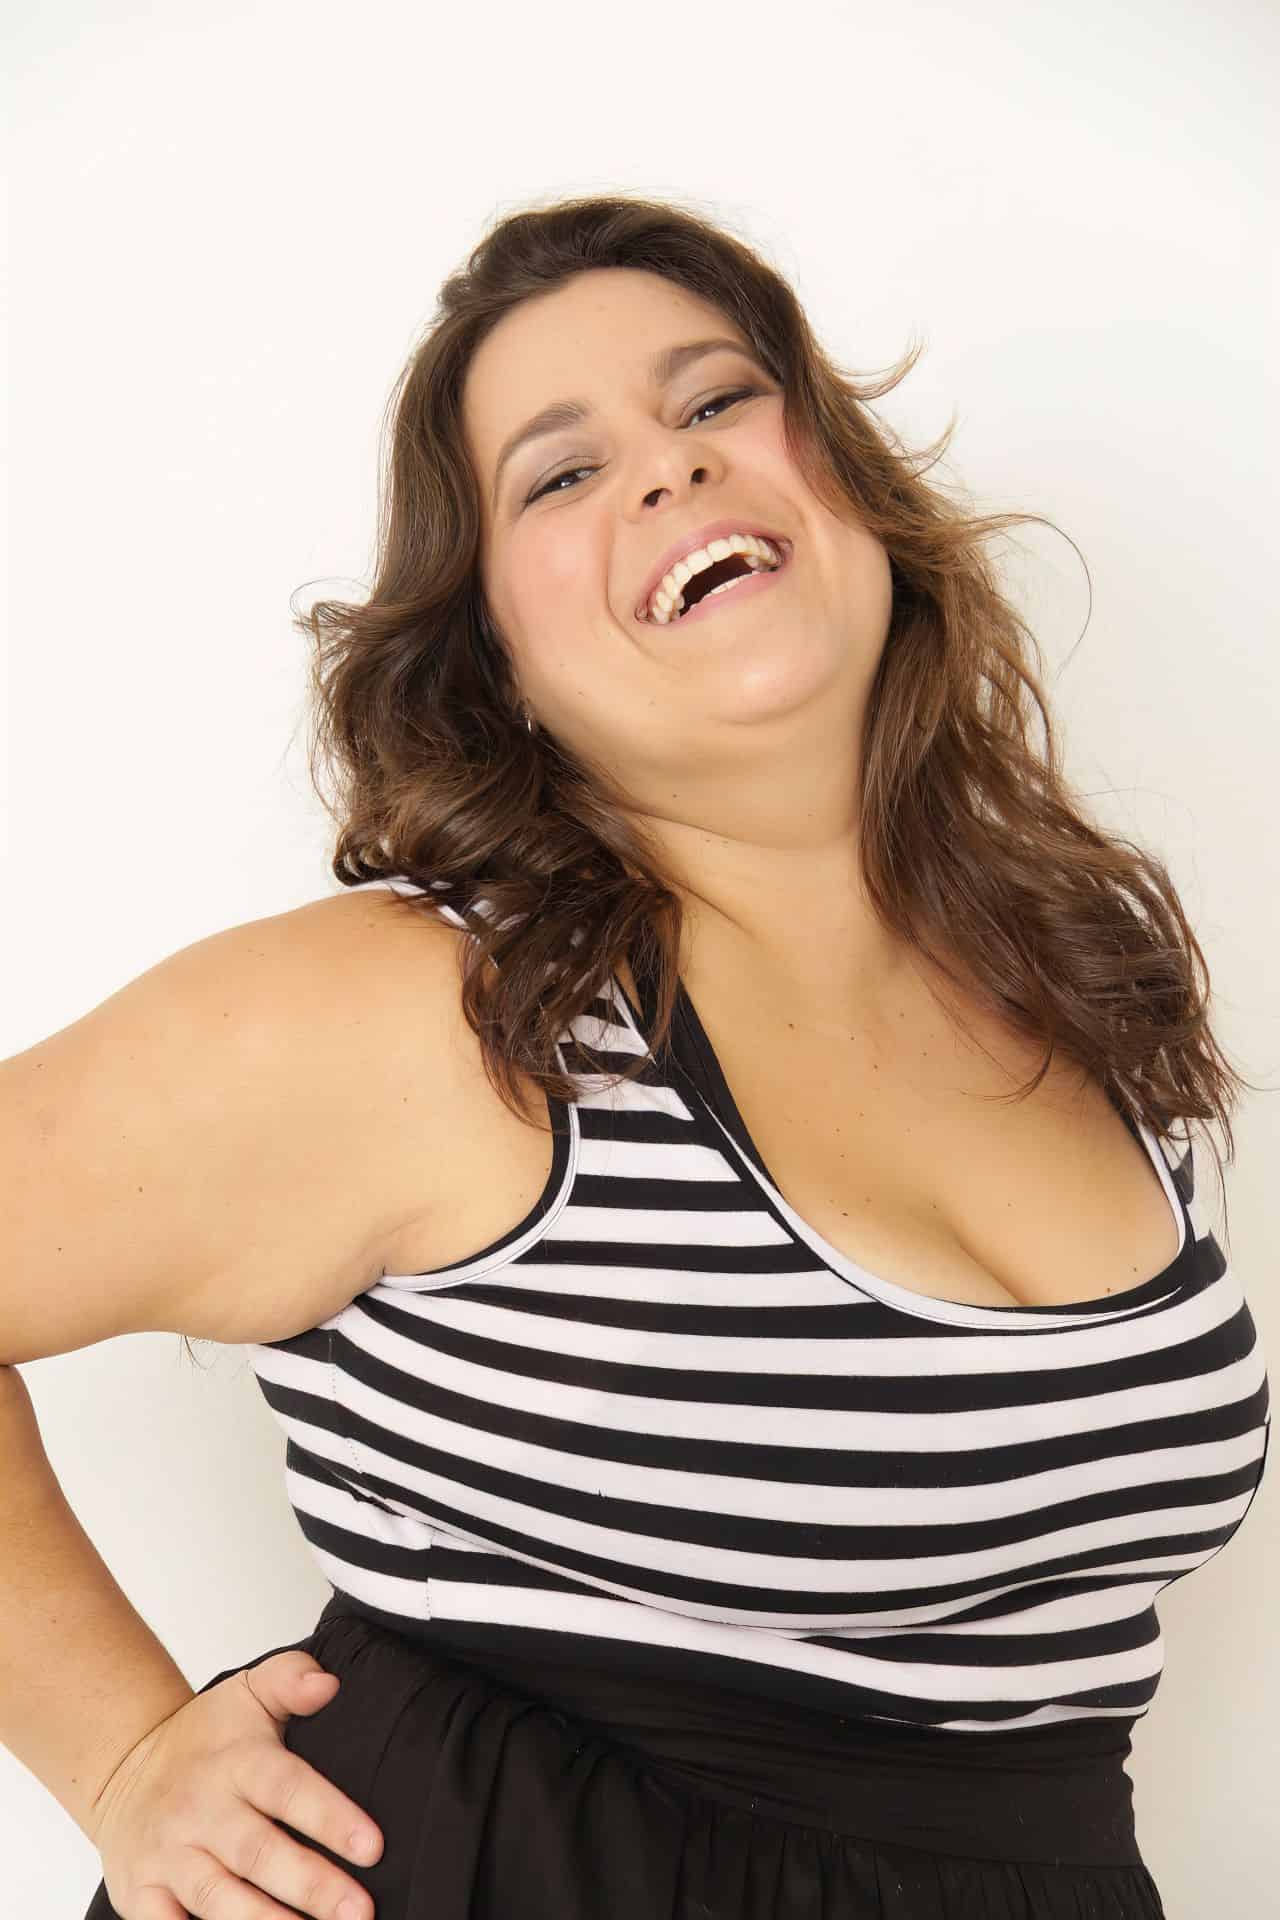 obese lady smiling